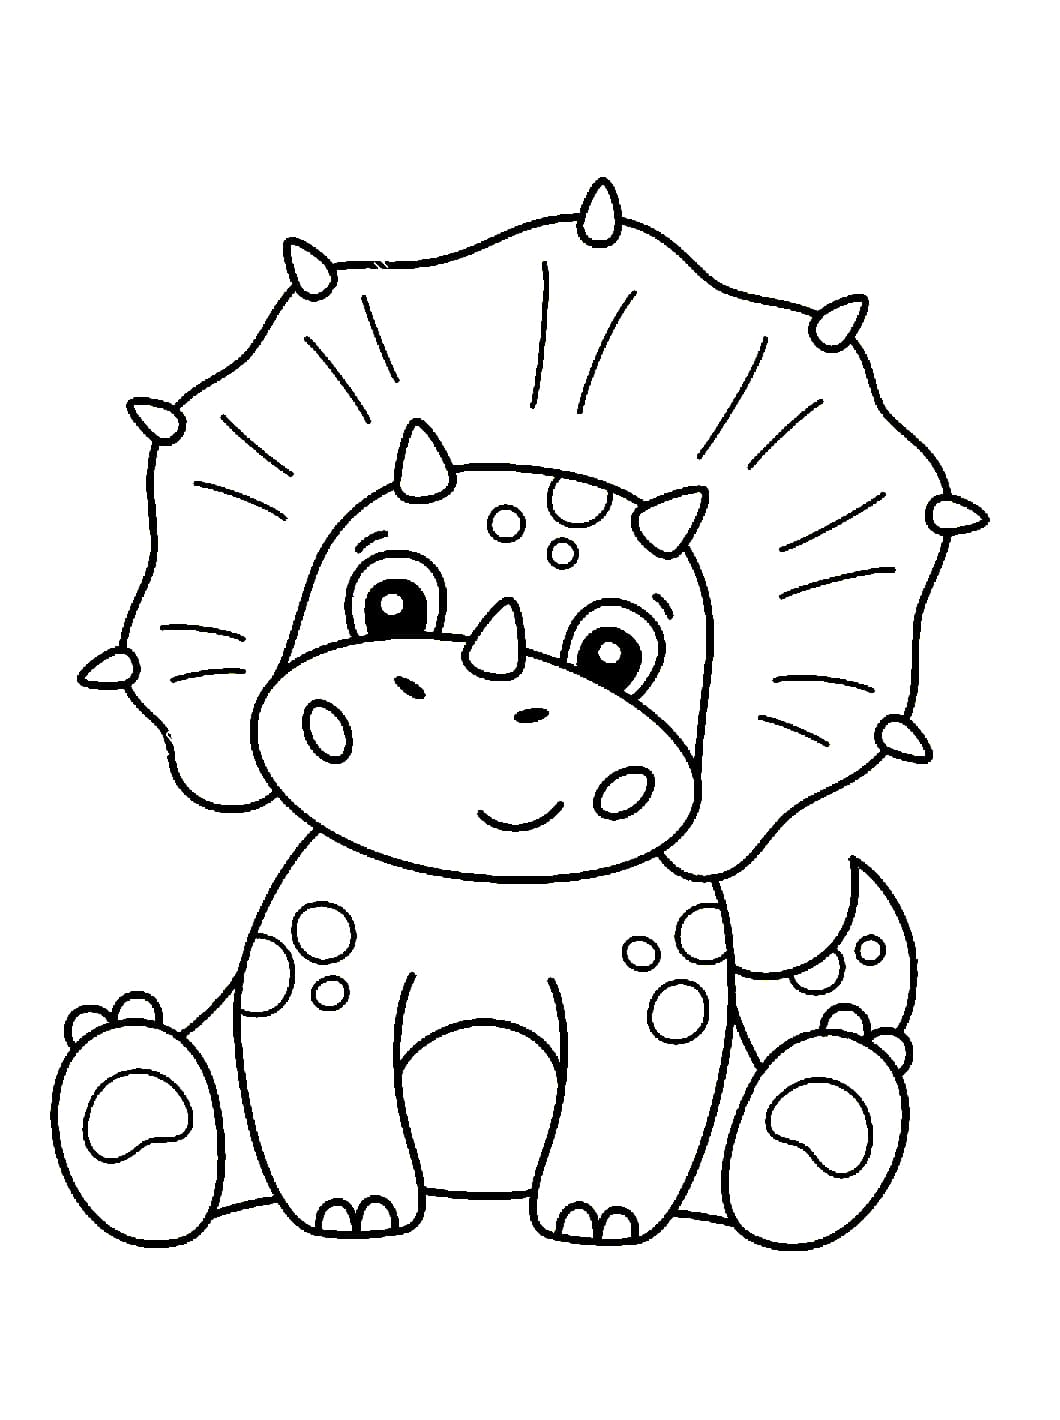 dinosaur-coloring-pages-120-free-coloring-pages